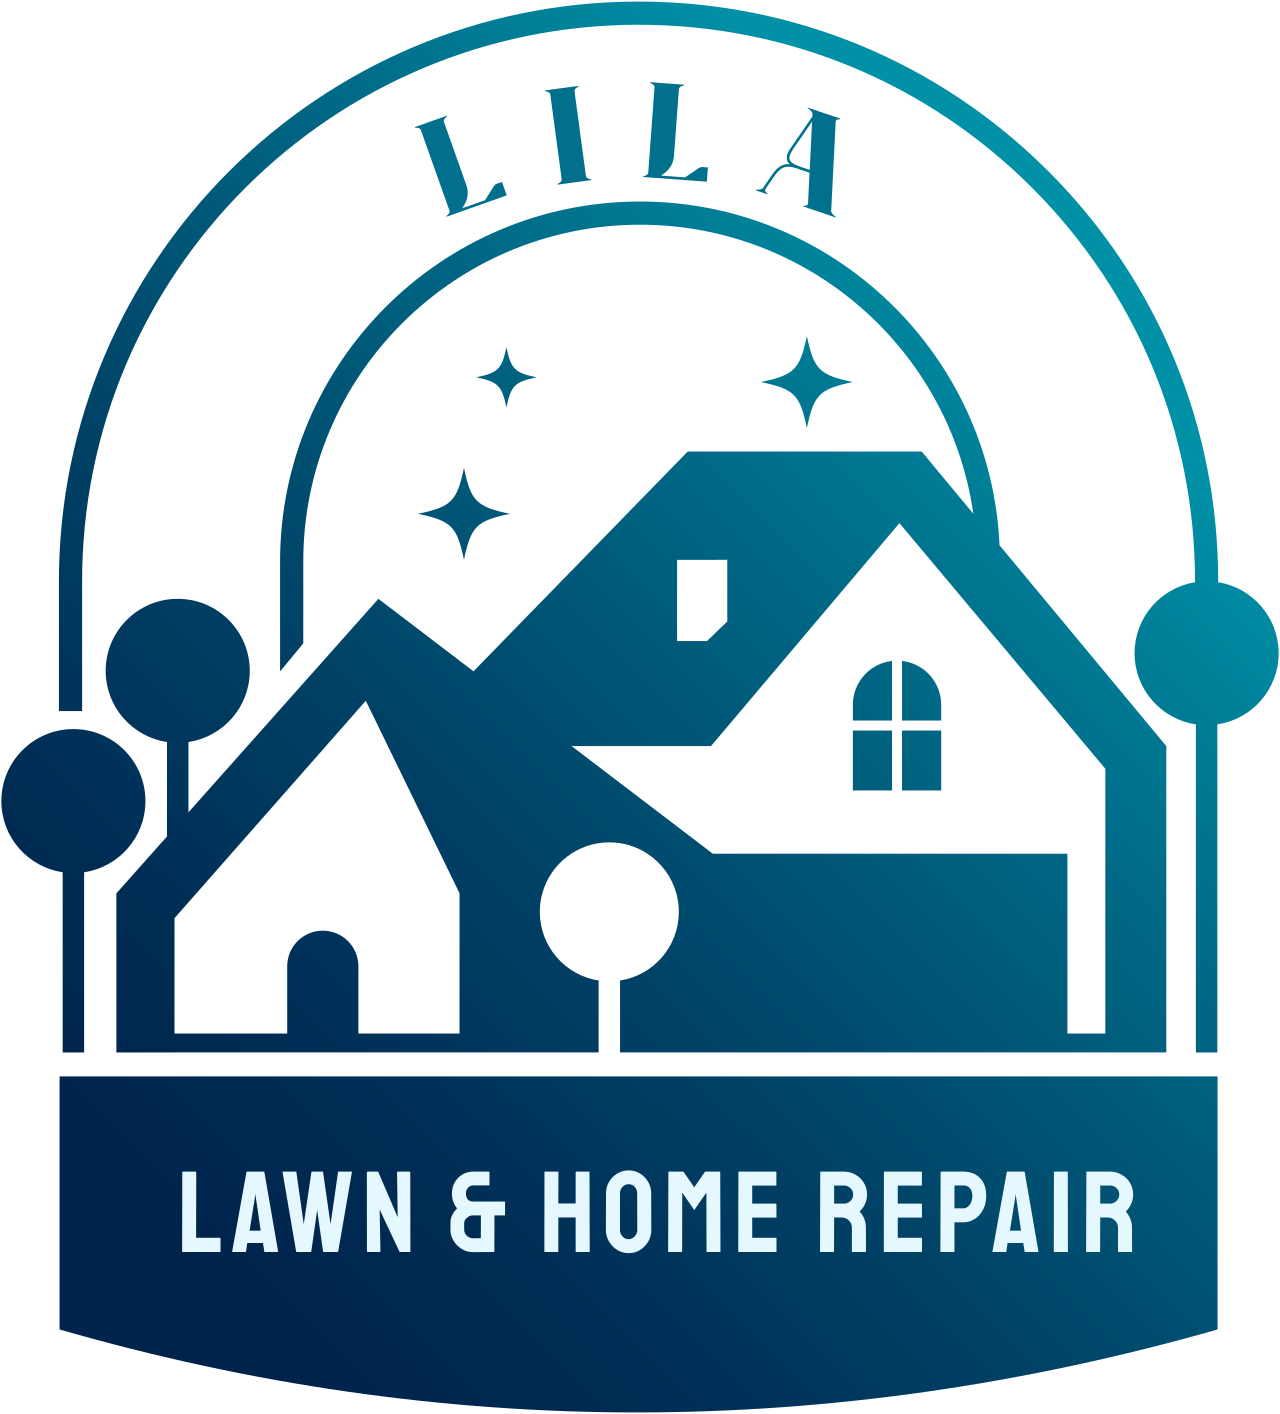 Lila’s Lawn & Home Repair 's web page